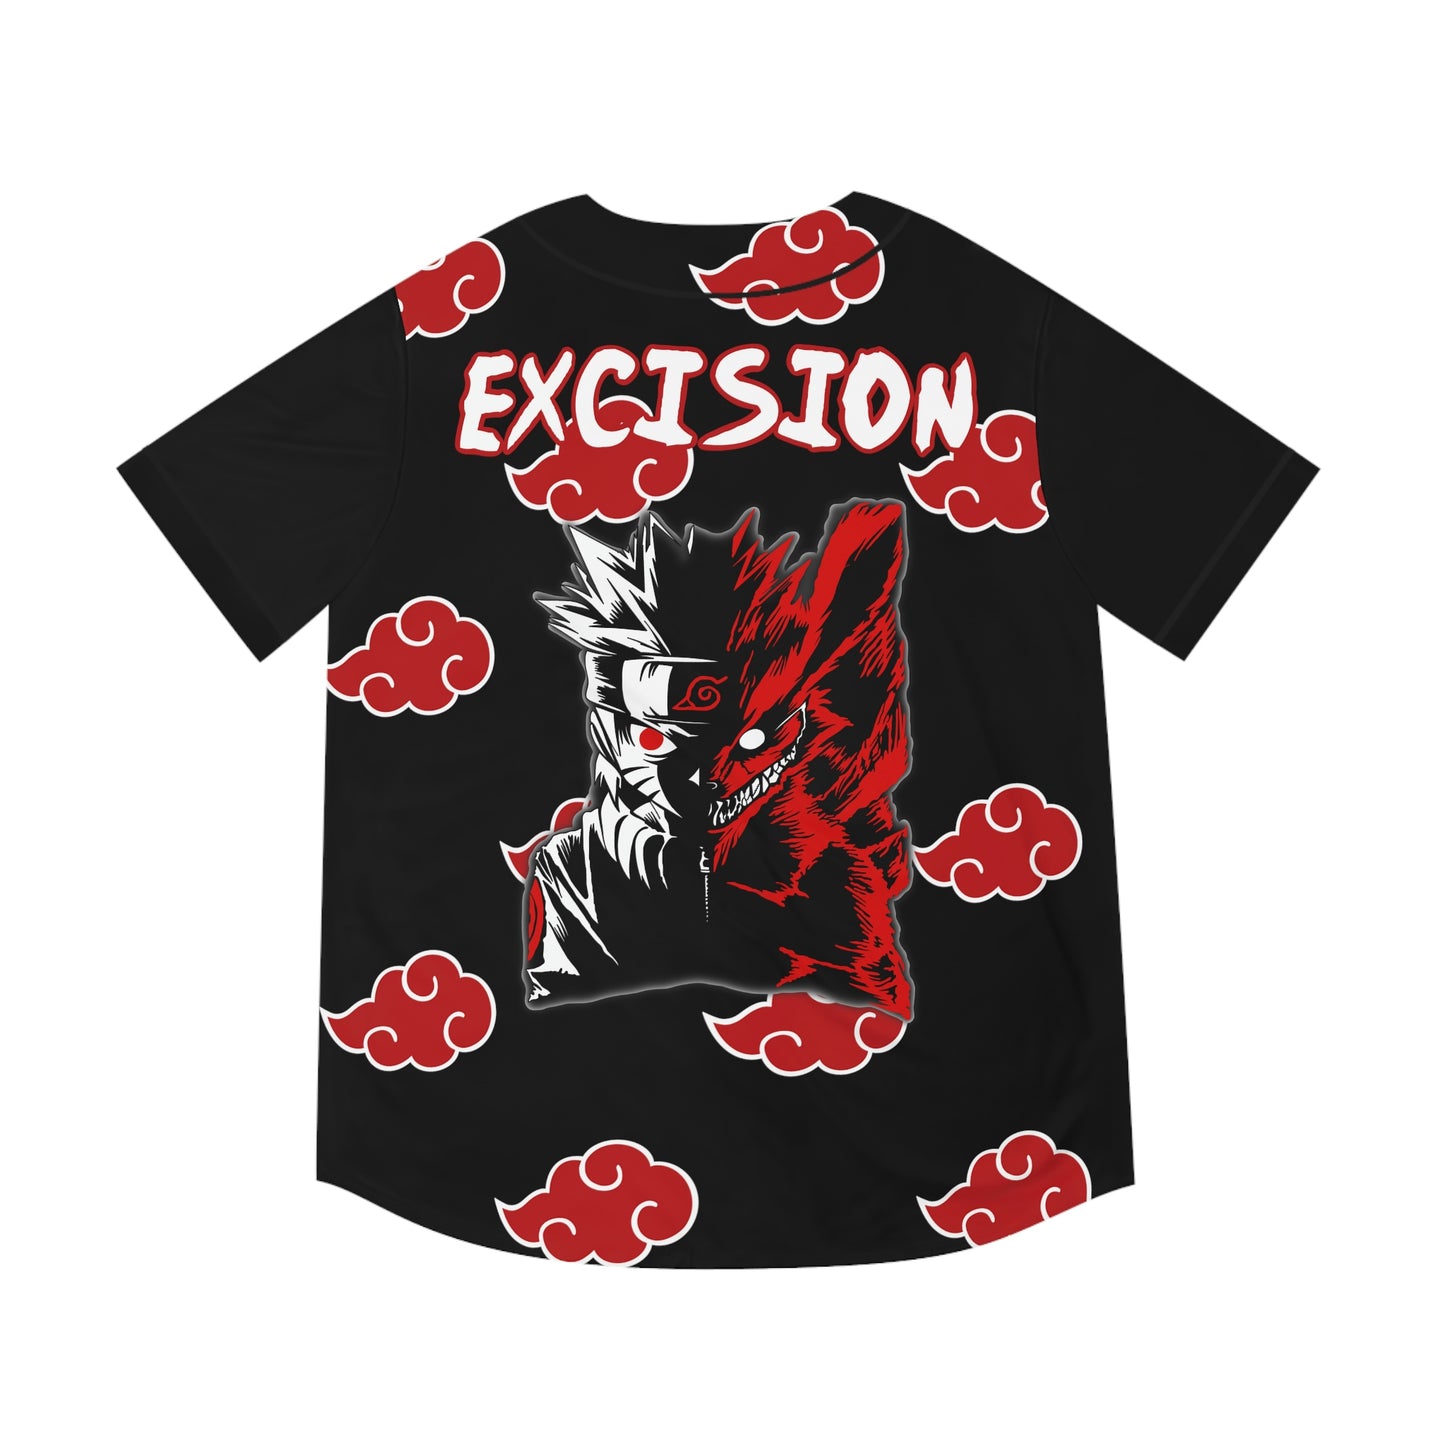 Excision x Naruto Jersey (Black Sleeves)